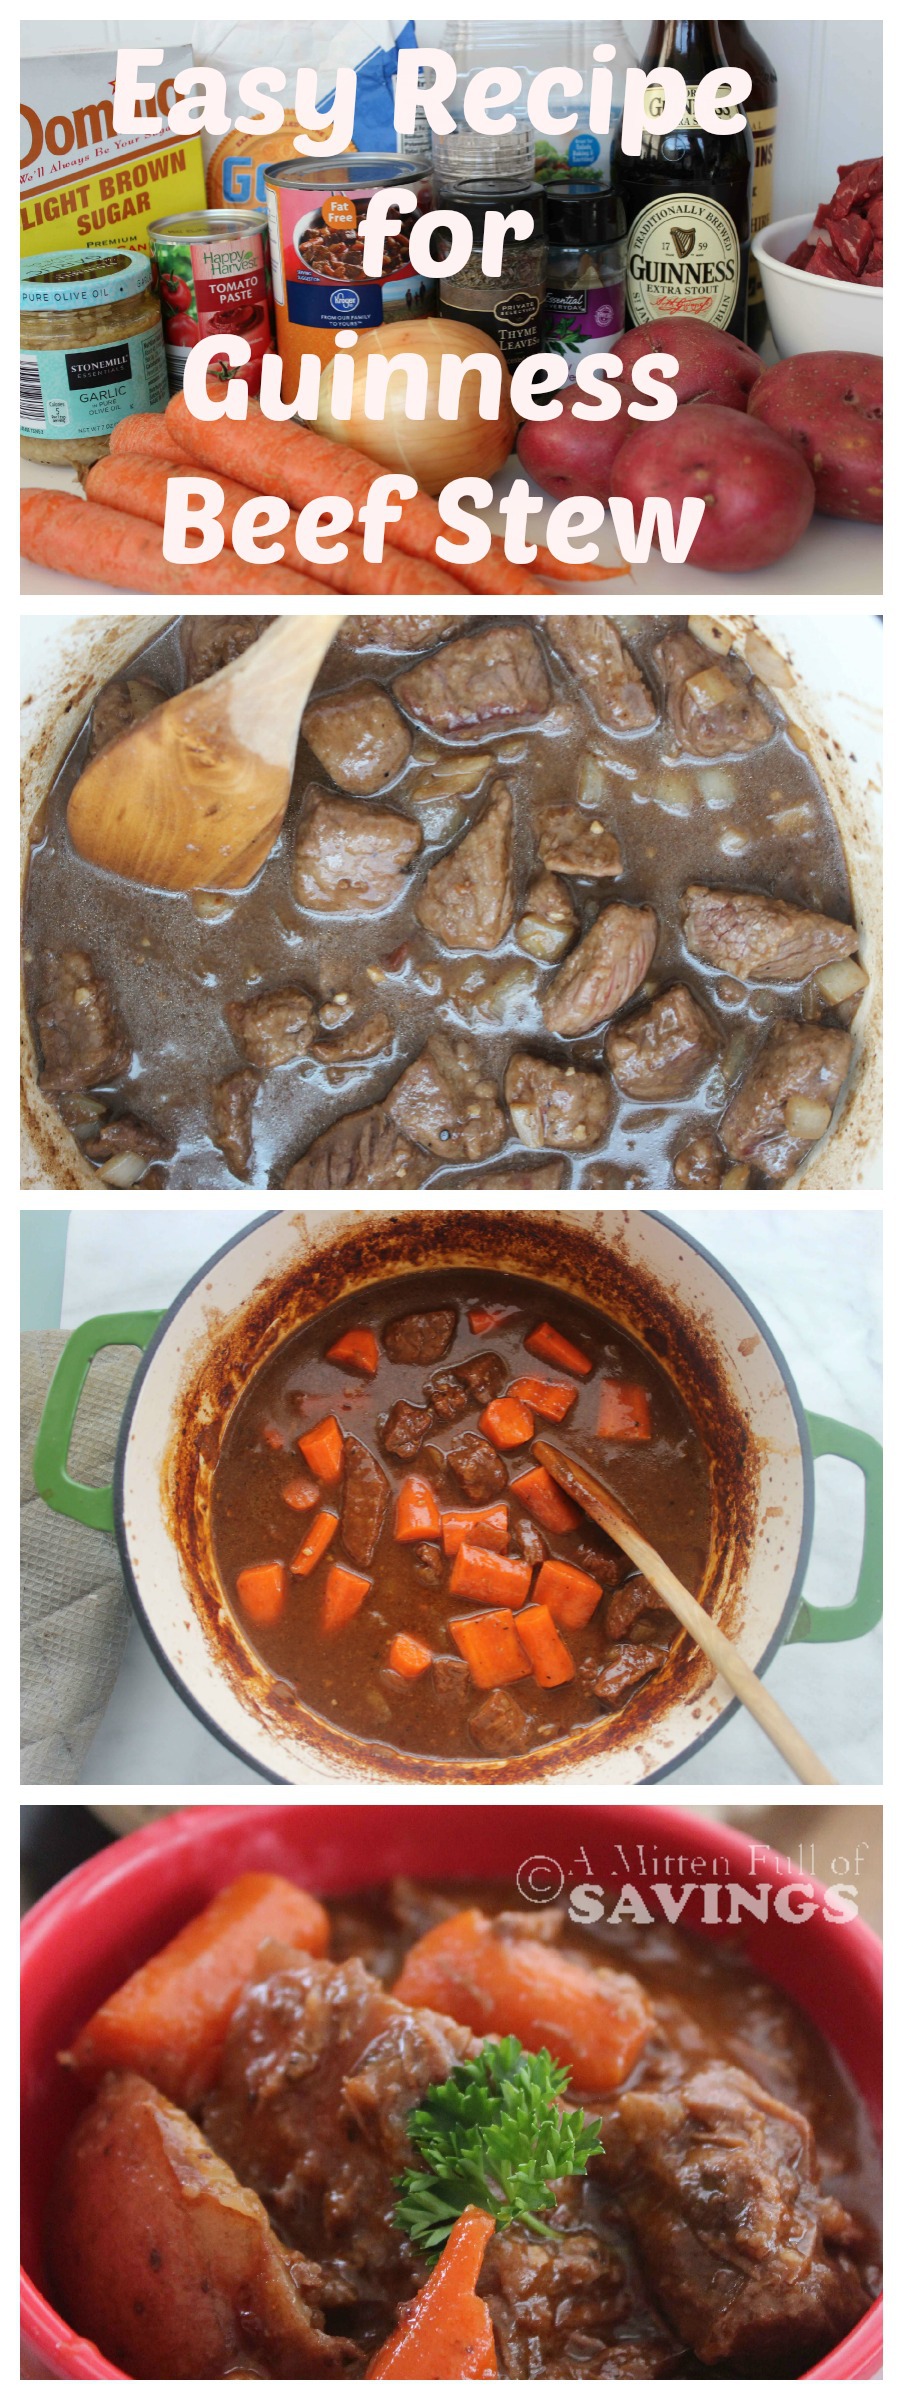 Get your St. Patrick's Day party on with this fabulous and easy recipe- Easy Recipe for Guinness Beef Stew 